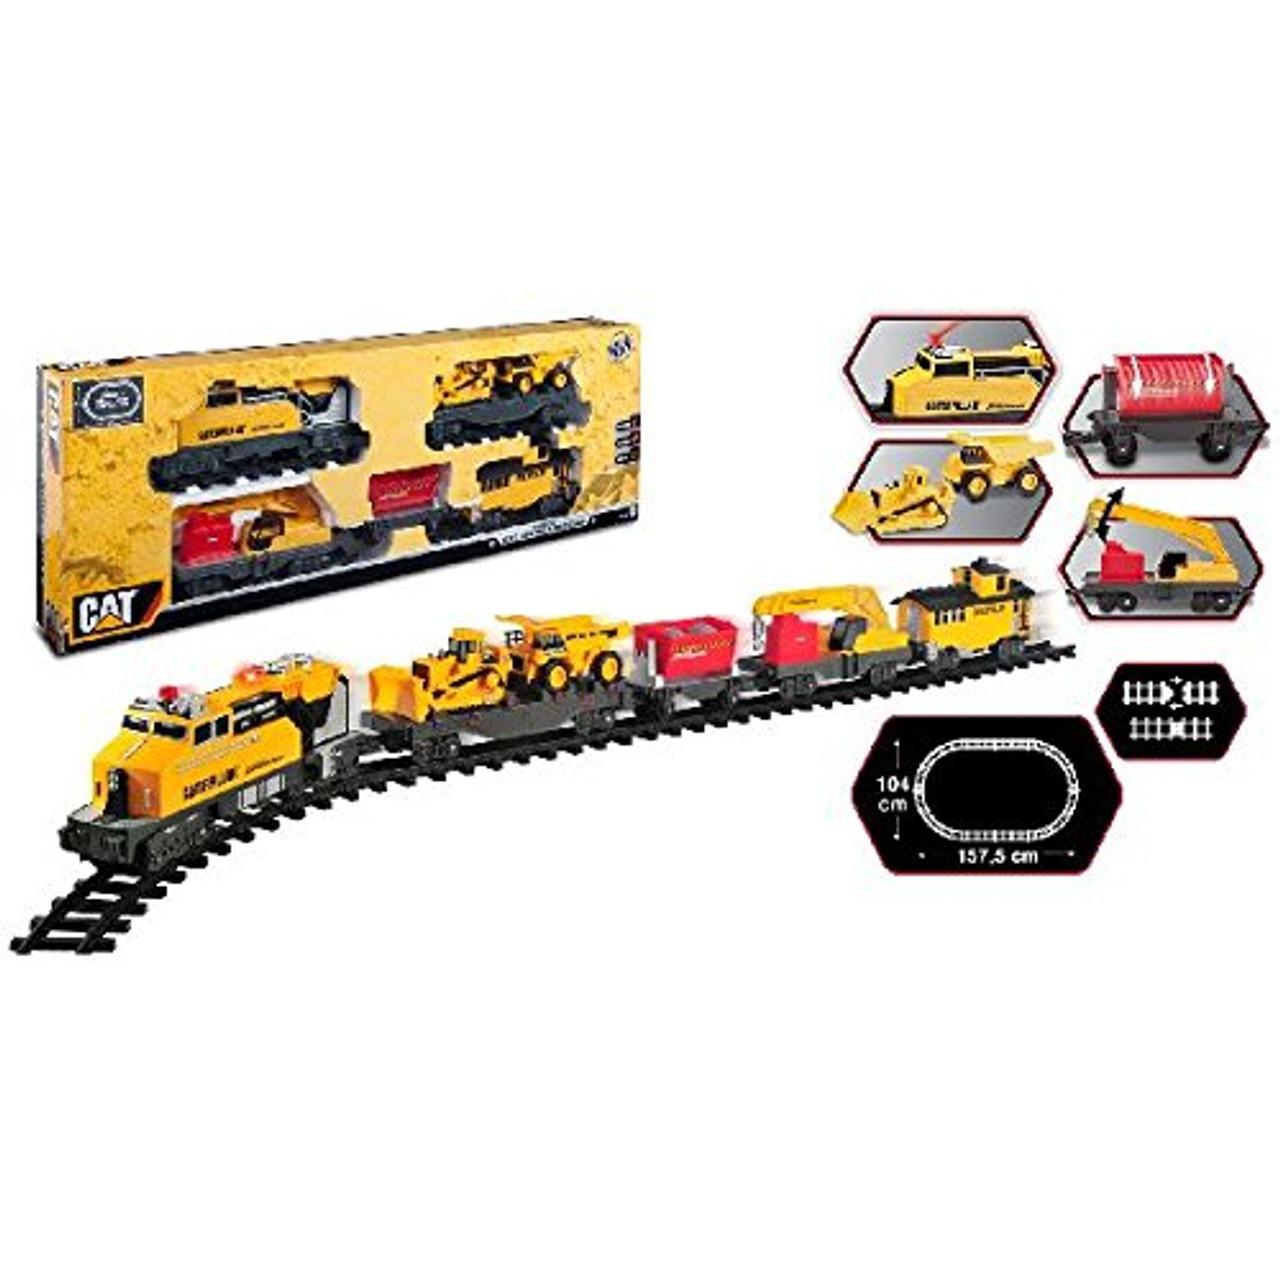 Cat Construction Express Train Set Over 23 Feet of Track 995676 for sale online 